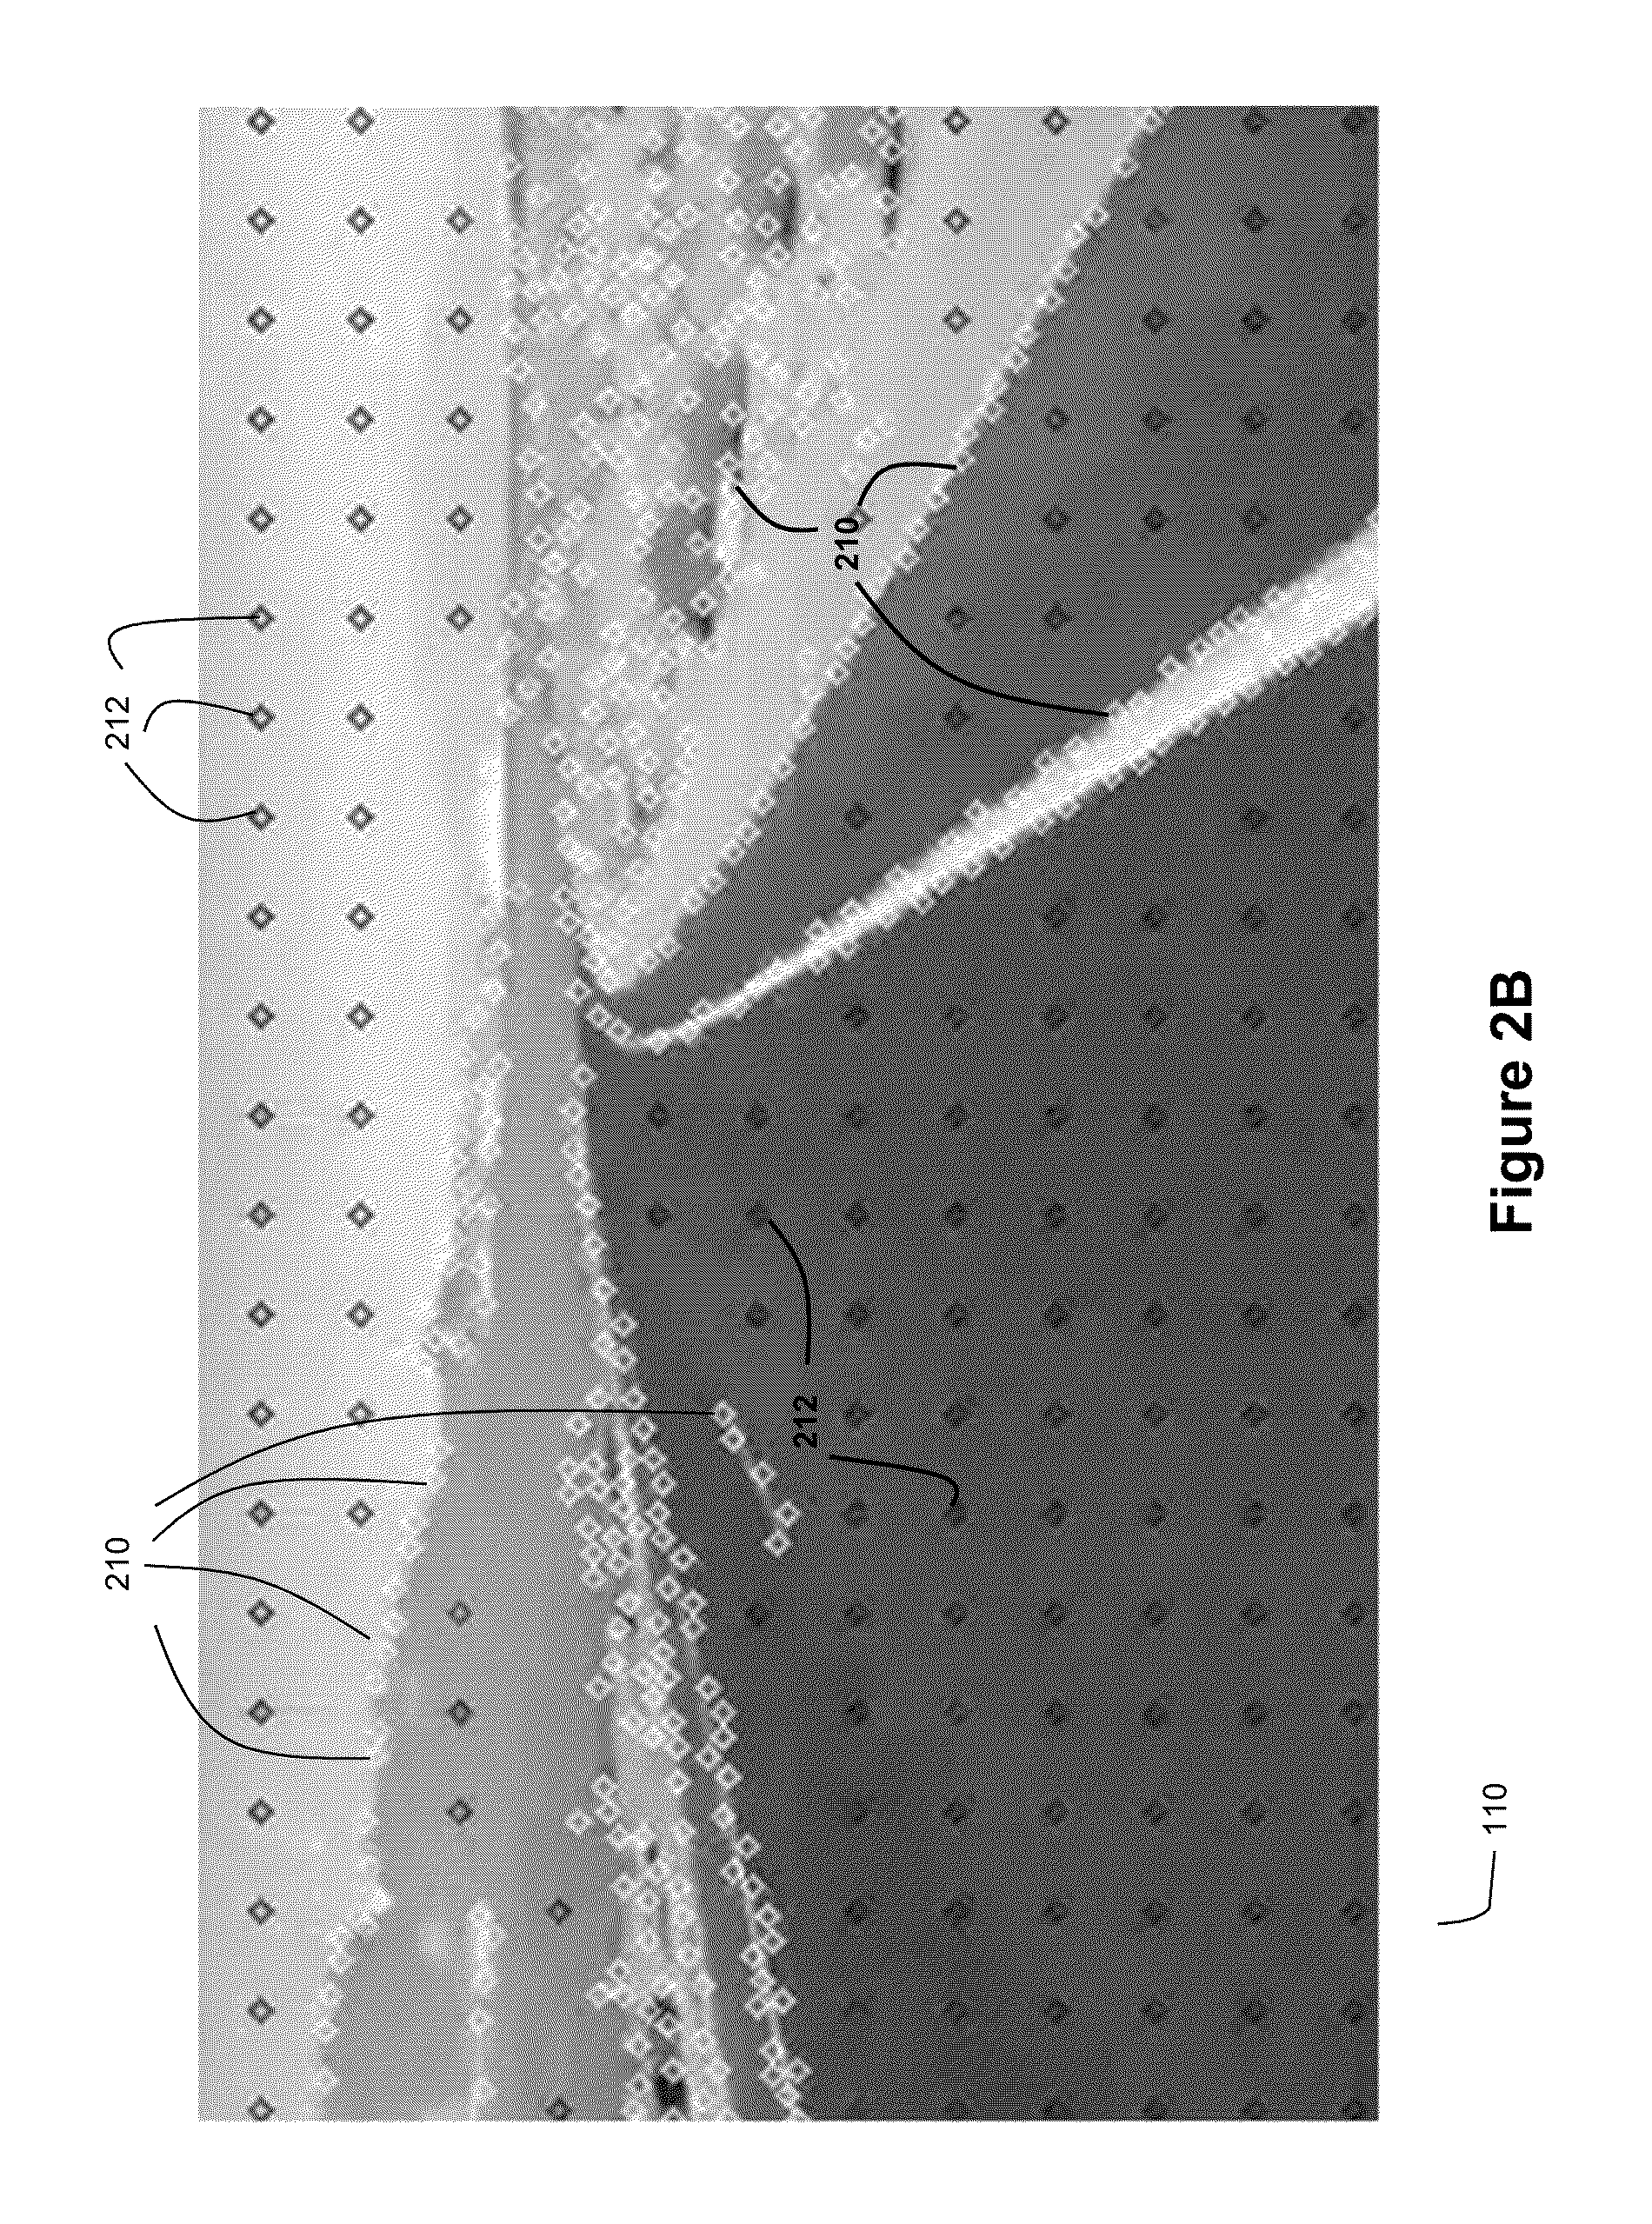 Method and System for Ladar Transmission with Interline Skipping for Dynamic Scan Patterns